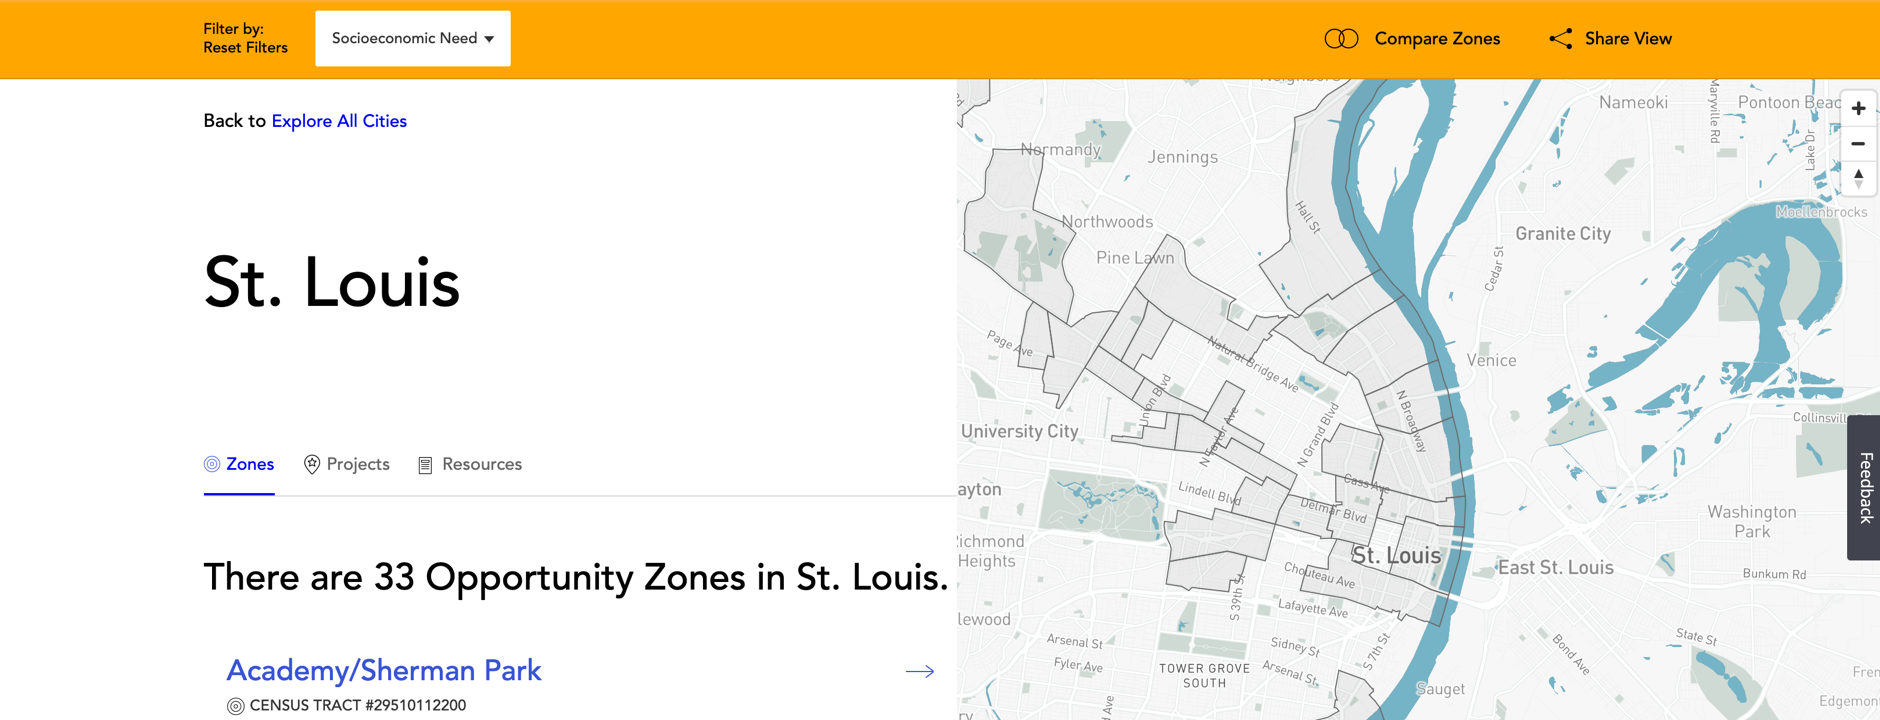 Screenshot of the City Builder website, showing a map of St. Louis with information that there are 33 opportunity zones in St. Louis